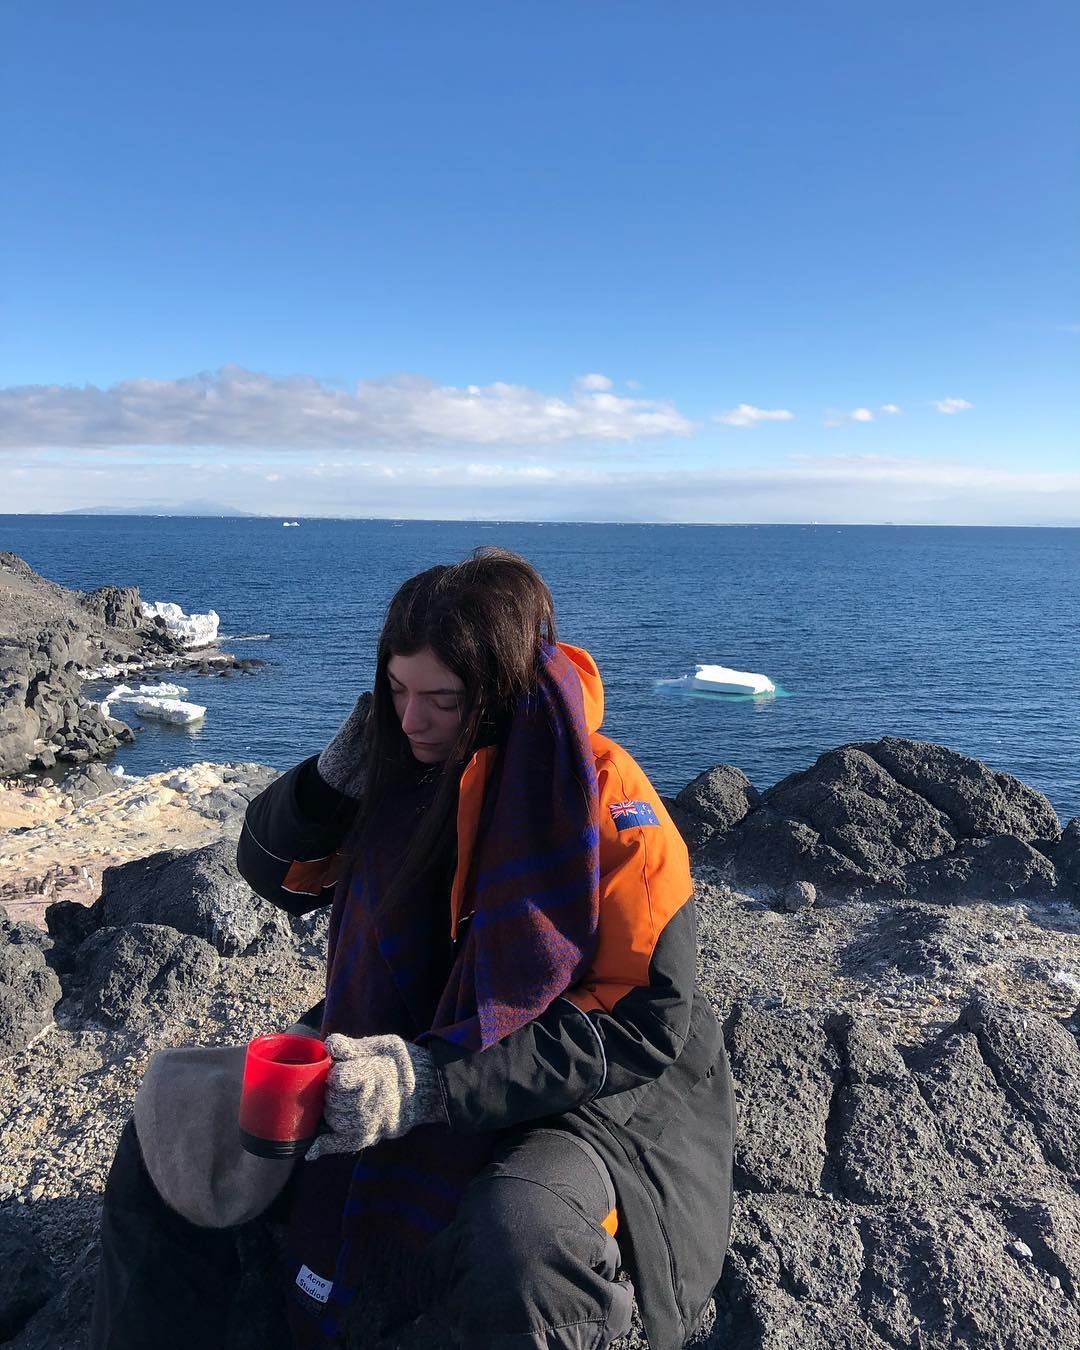 Lorde fix ? BlackLivesMatter on Twitter: "New pics from Lorde's Antarctic  adventure, shared by her friend Harriet… "